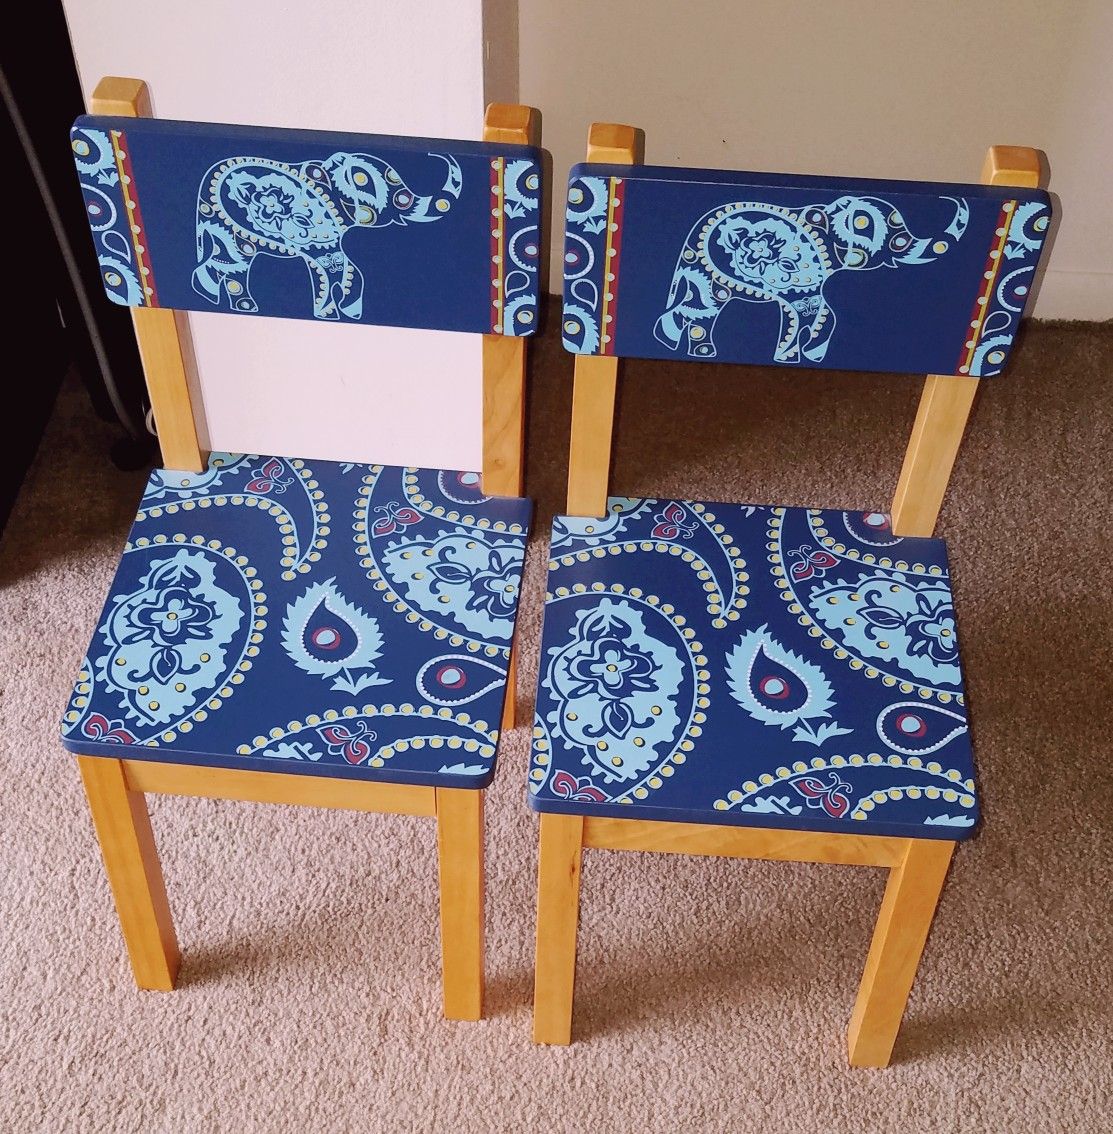 PIER ONE CLASSIC KID'S WOODEN CHAIRS SET OF 2 EXCLUSIVELY HANDMADE IN THAILAND 24X12 W/ELEPHANT PAISLEY OUT OF PRODUCTION